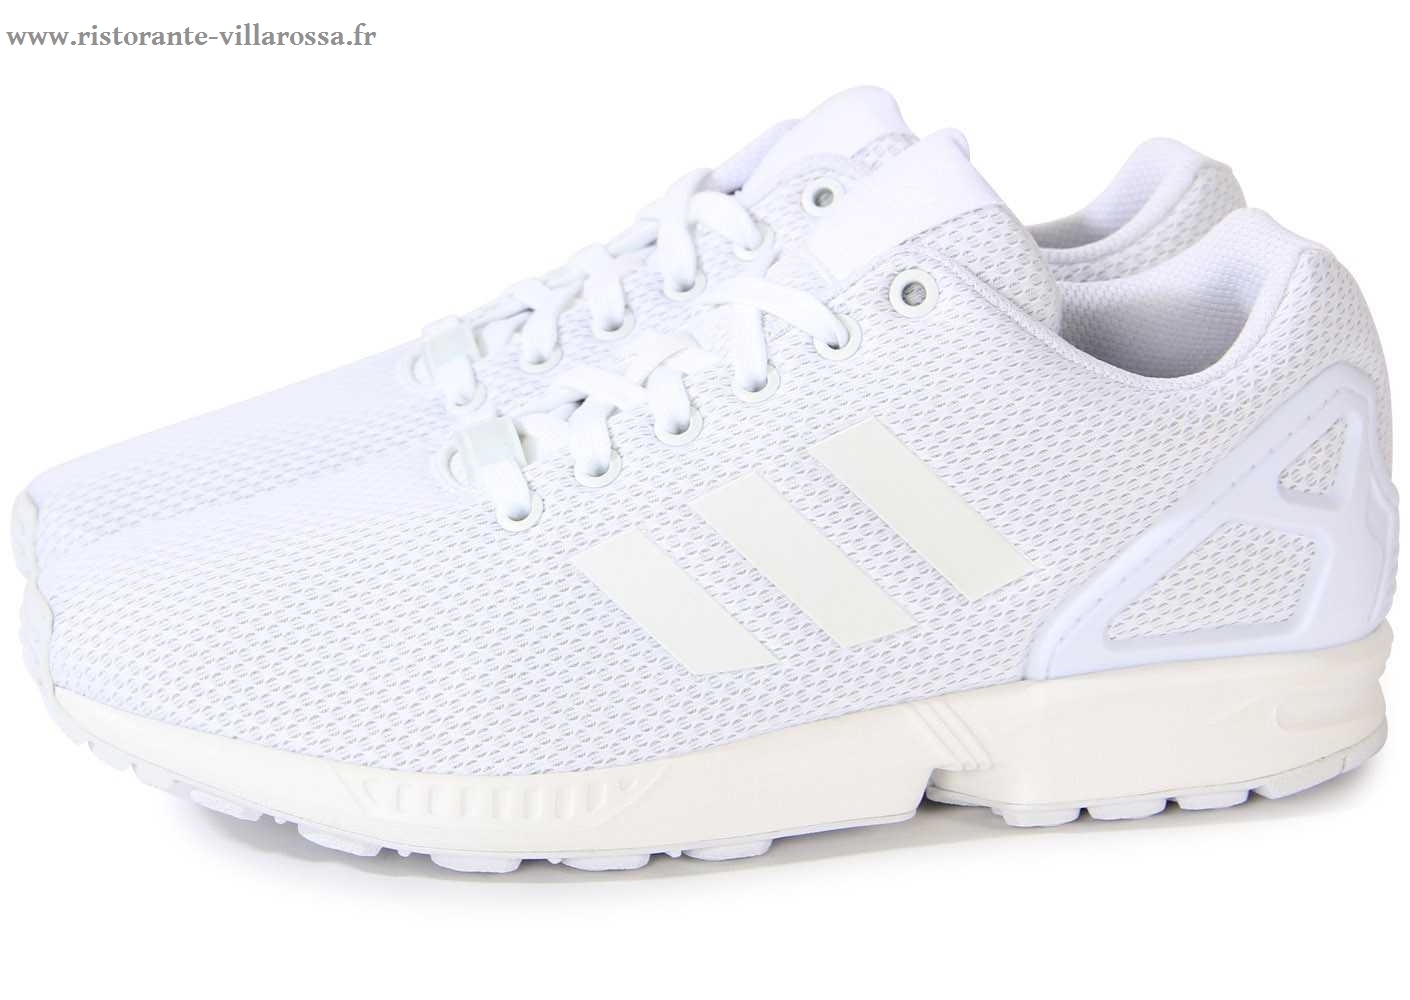 adidas chaussures blanche